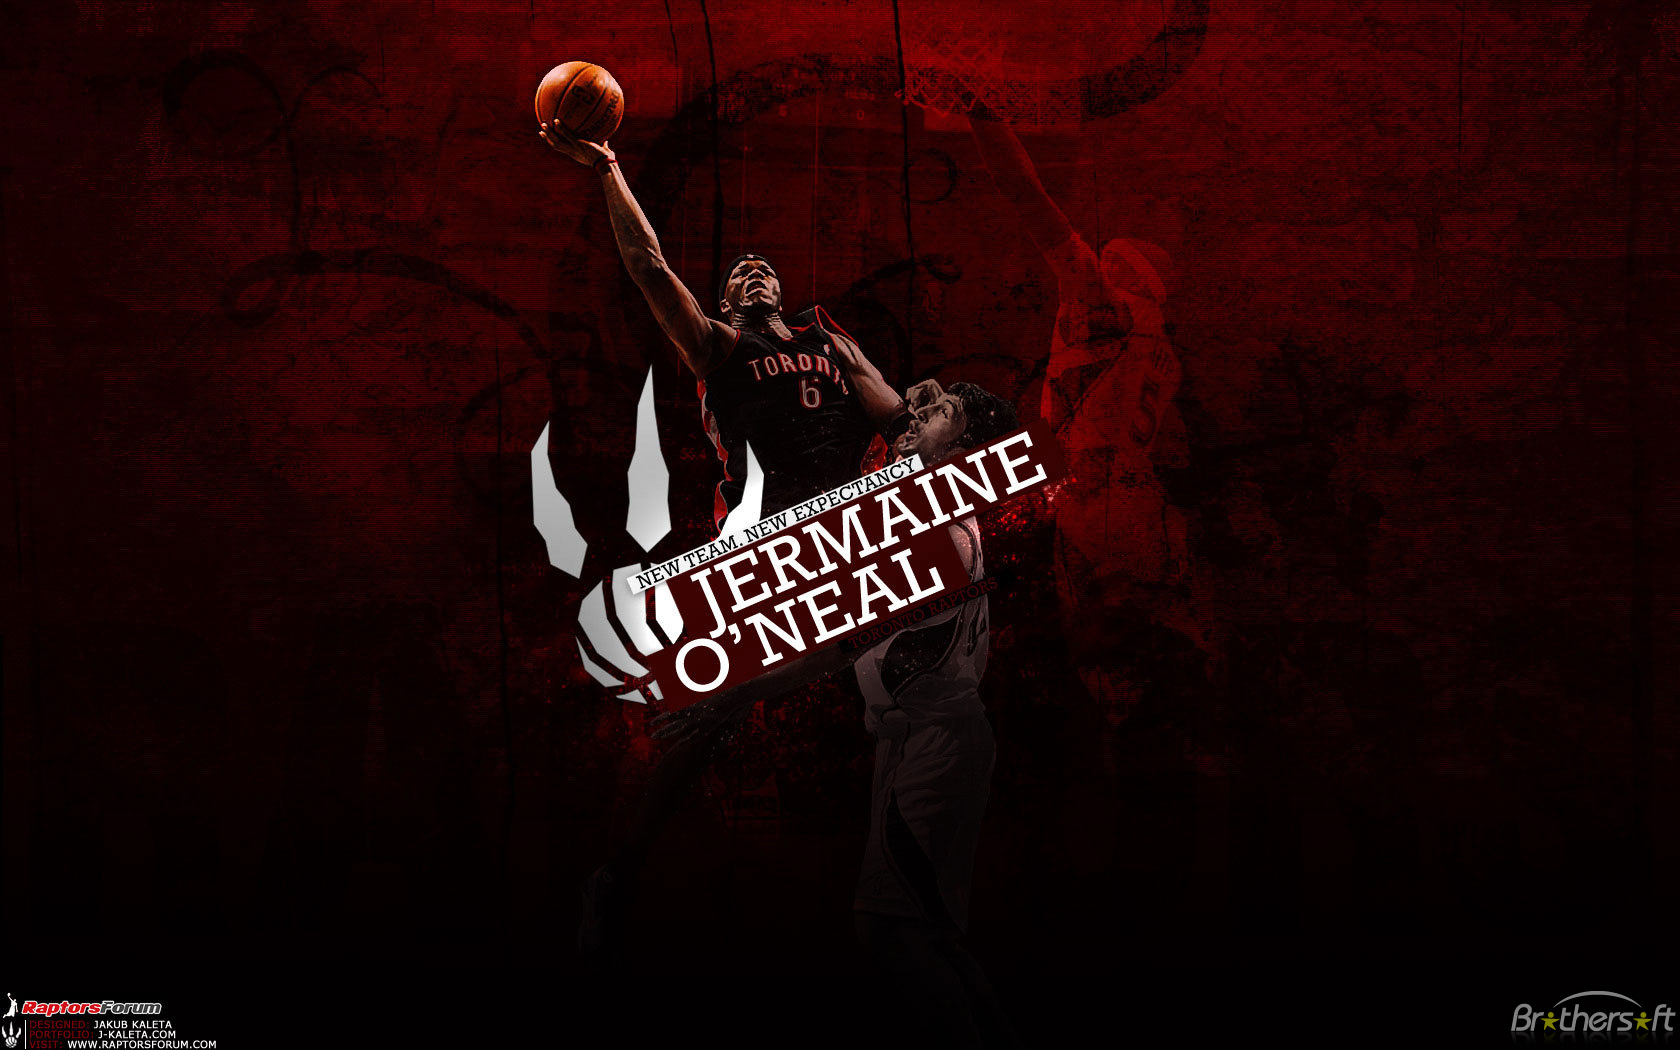  Basketball Player wallpaper Jermaine ONeal A Famous Basketball Player